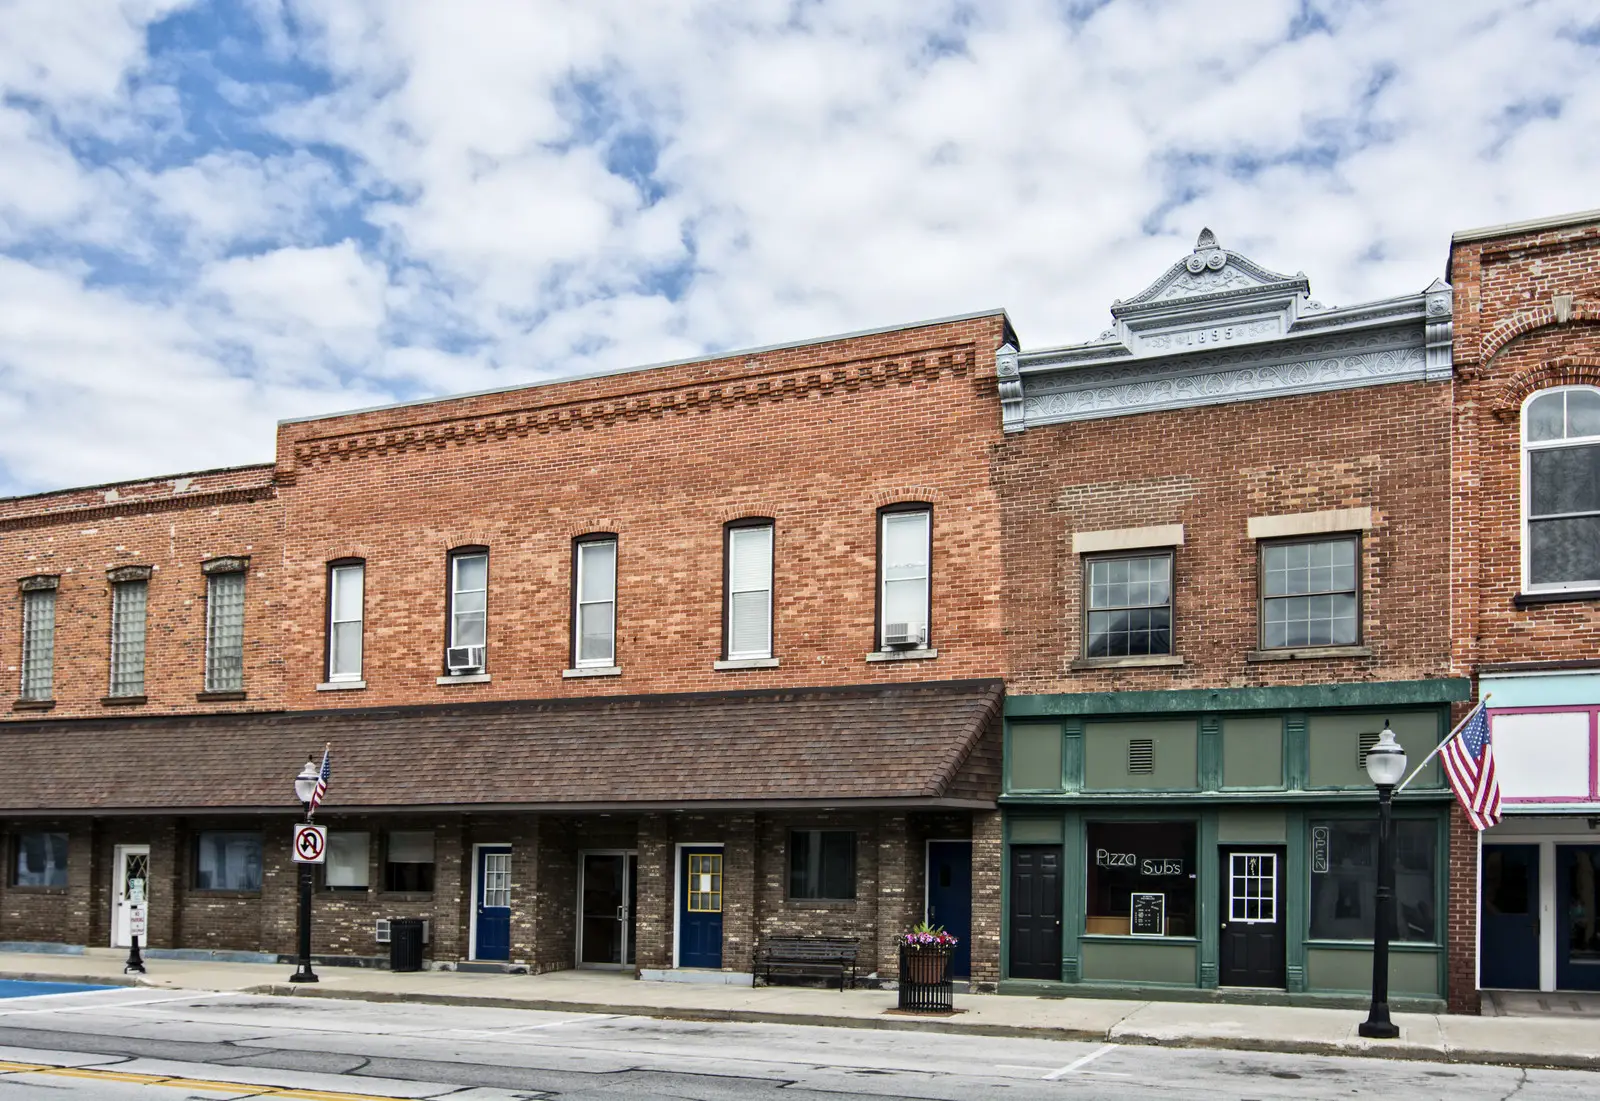 Small town main street with old brick store fronts - Blue sky with white billowy clouds